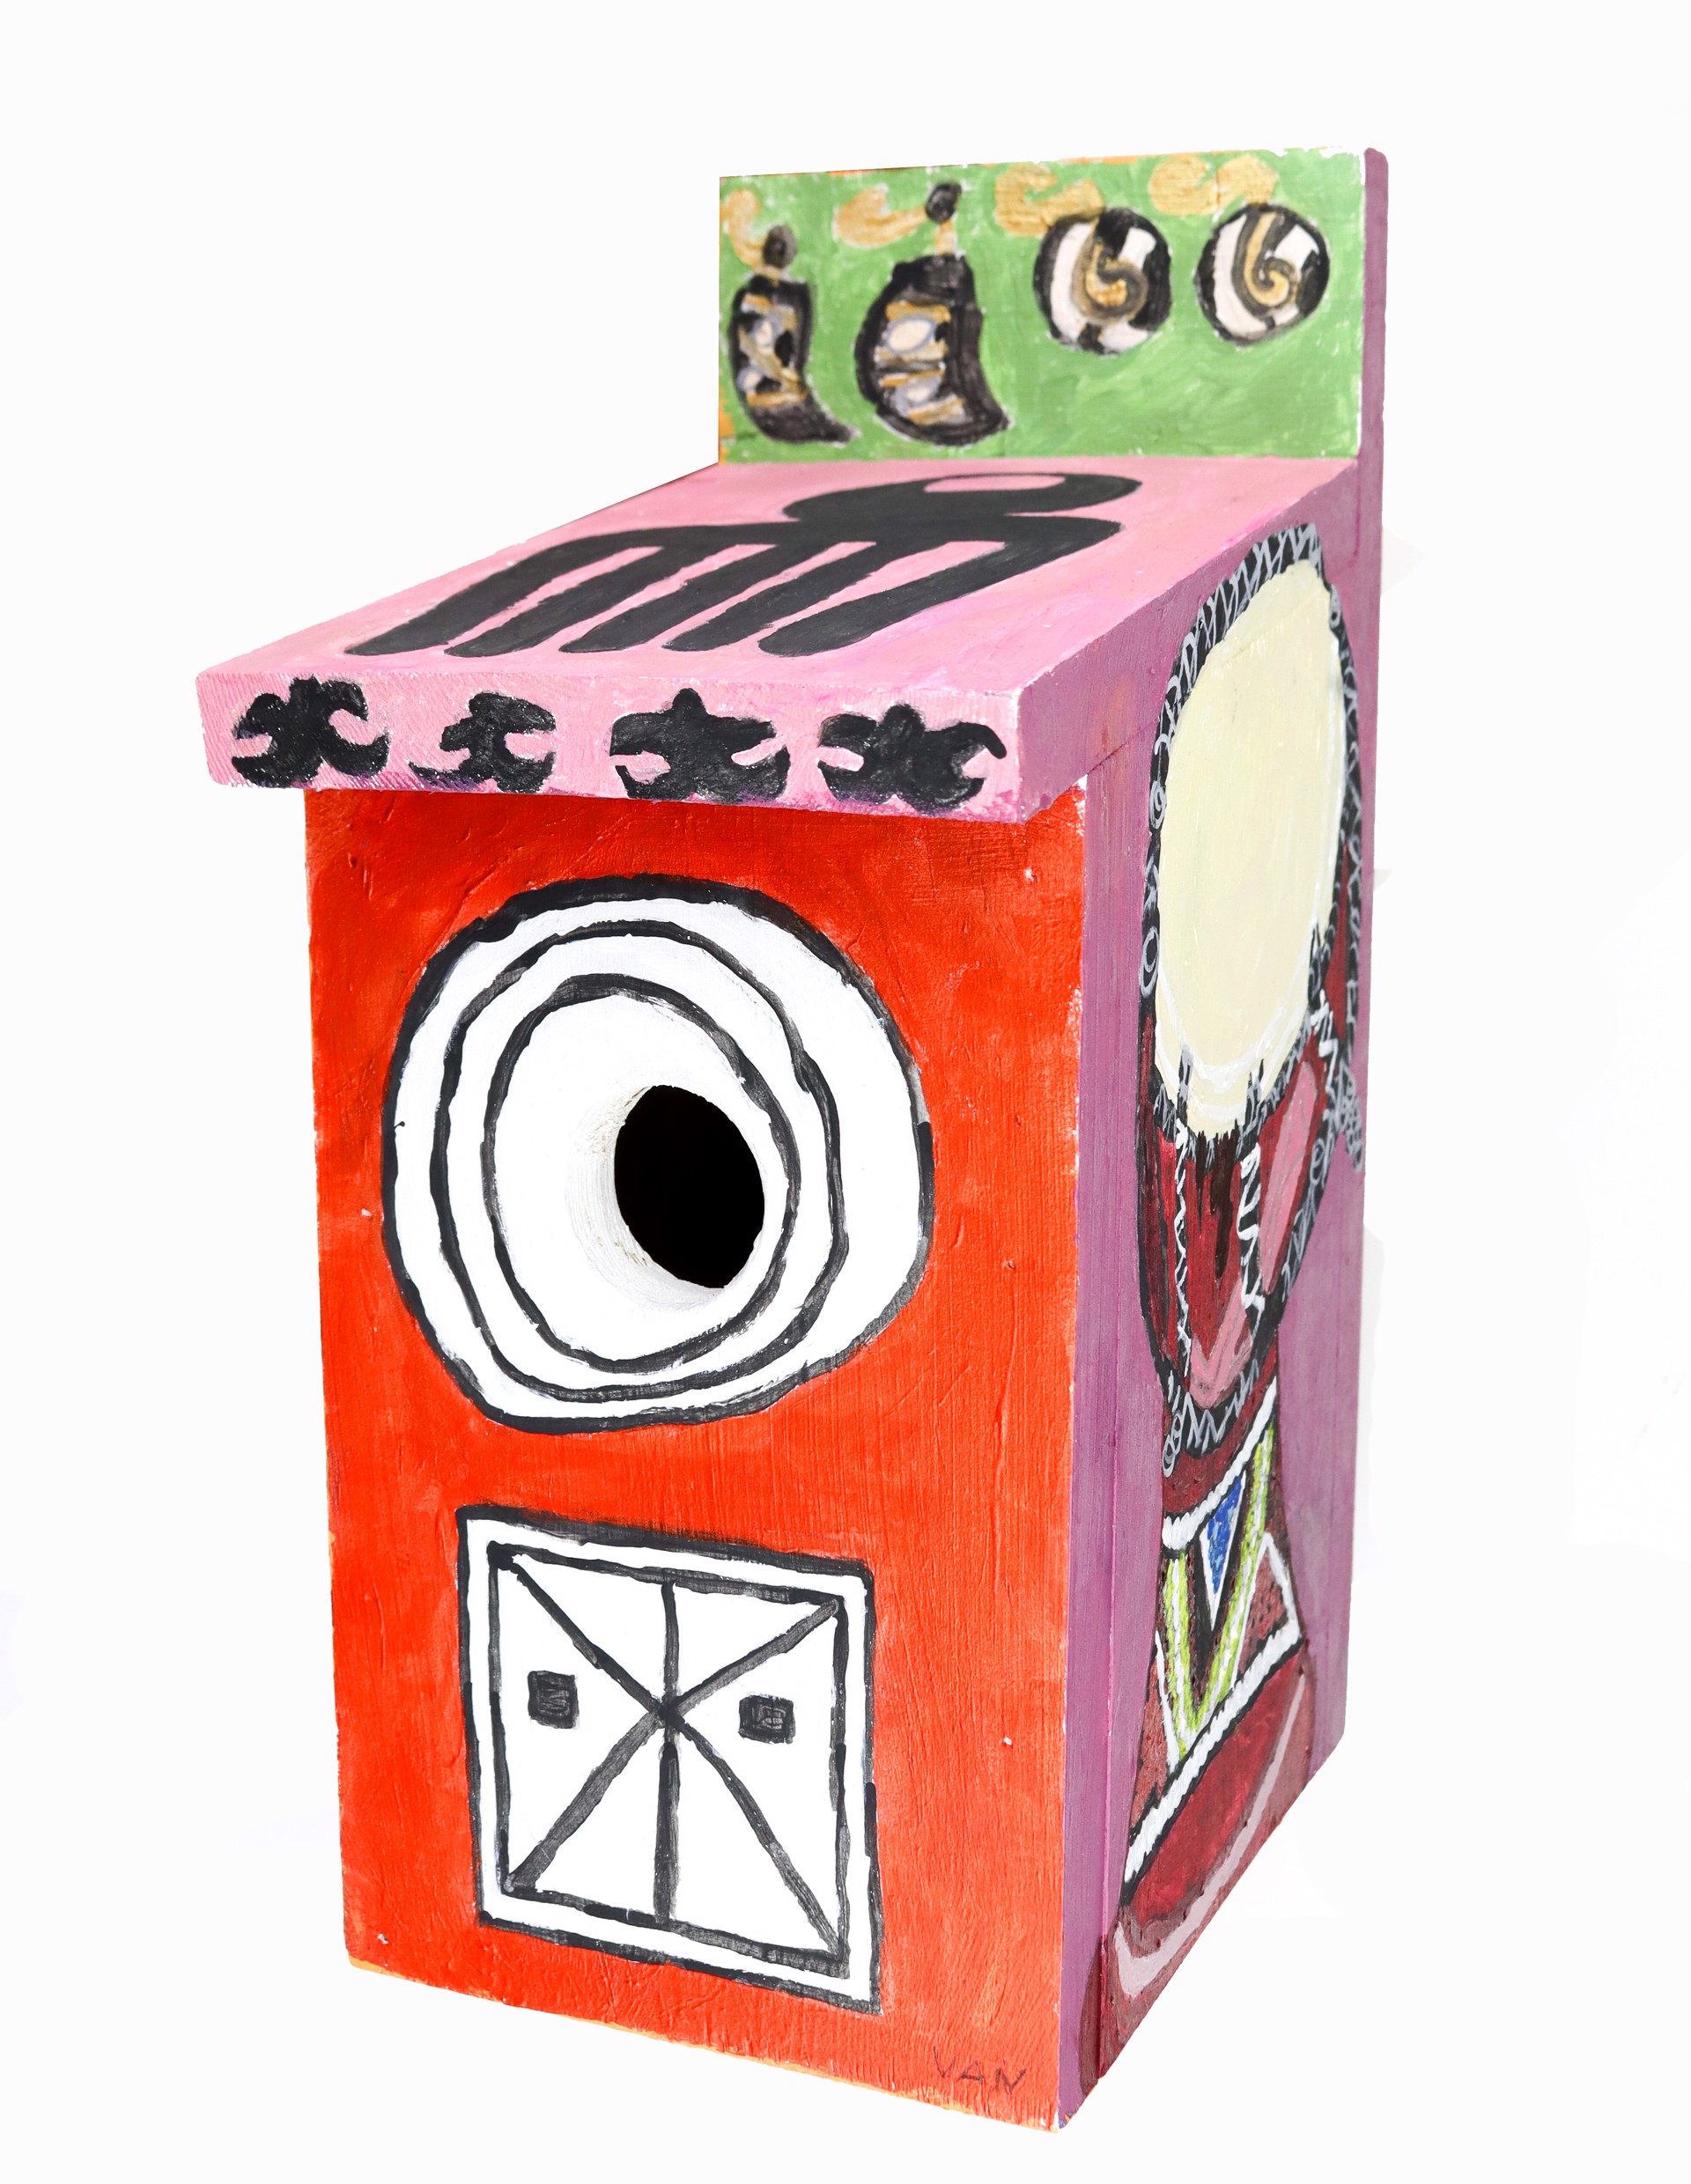 West African Cultural (Birdhouse) by Vanessa Monroe